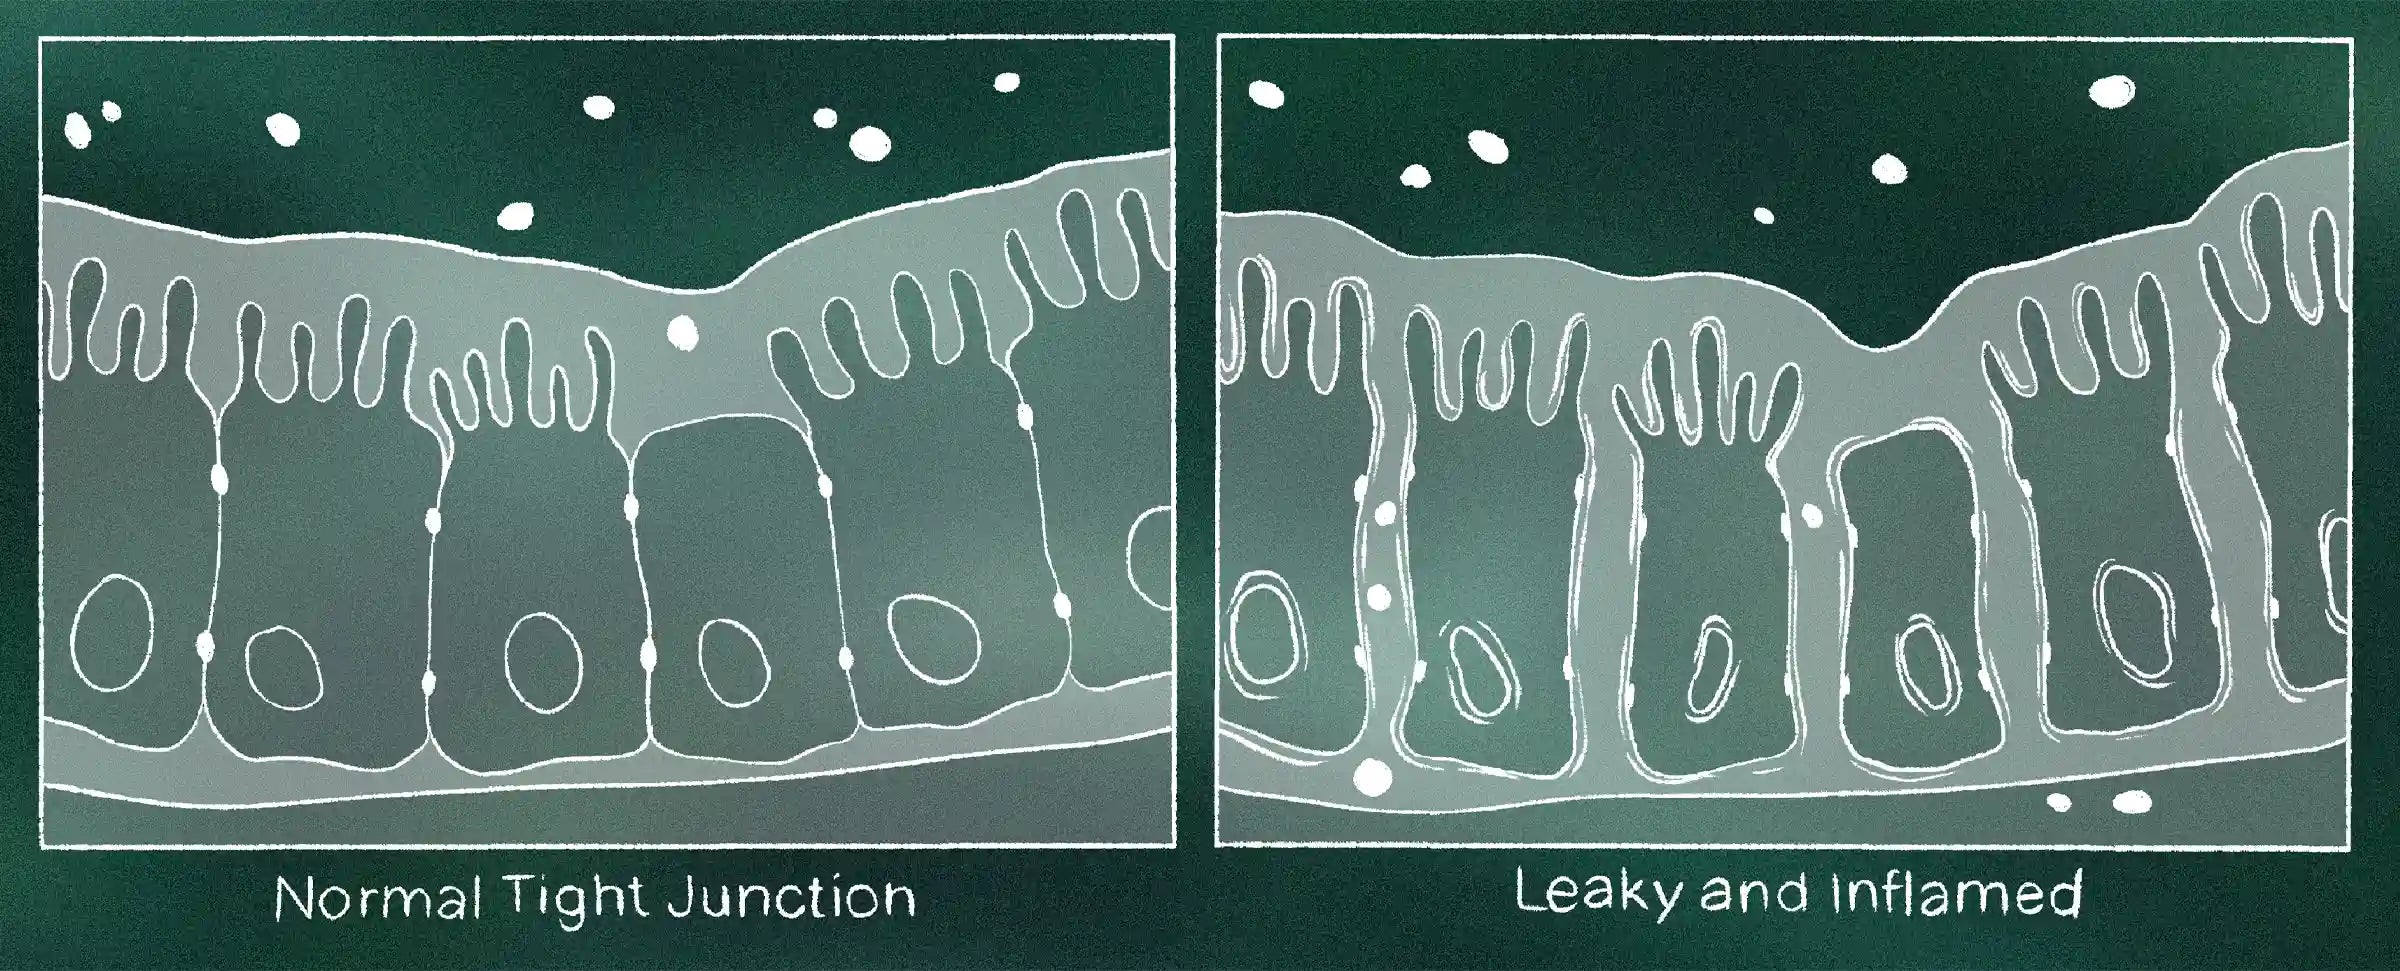 leaky-gut-normal-tight-junction-leaky-and-inflamed